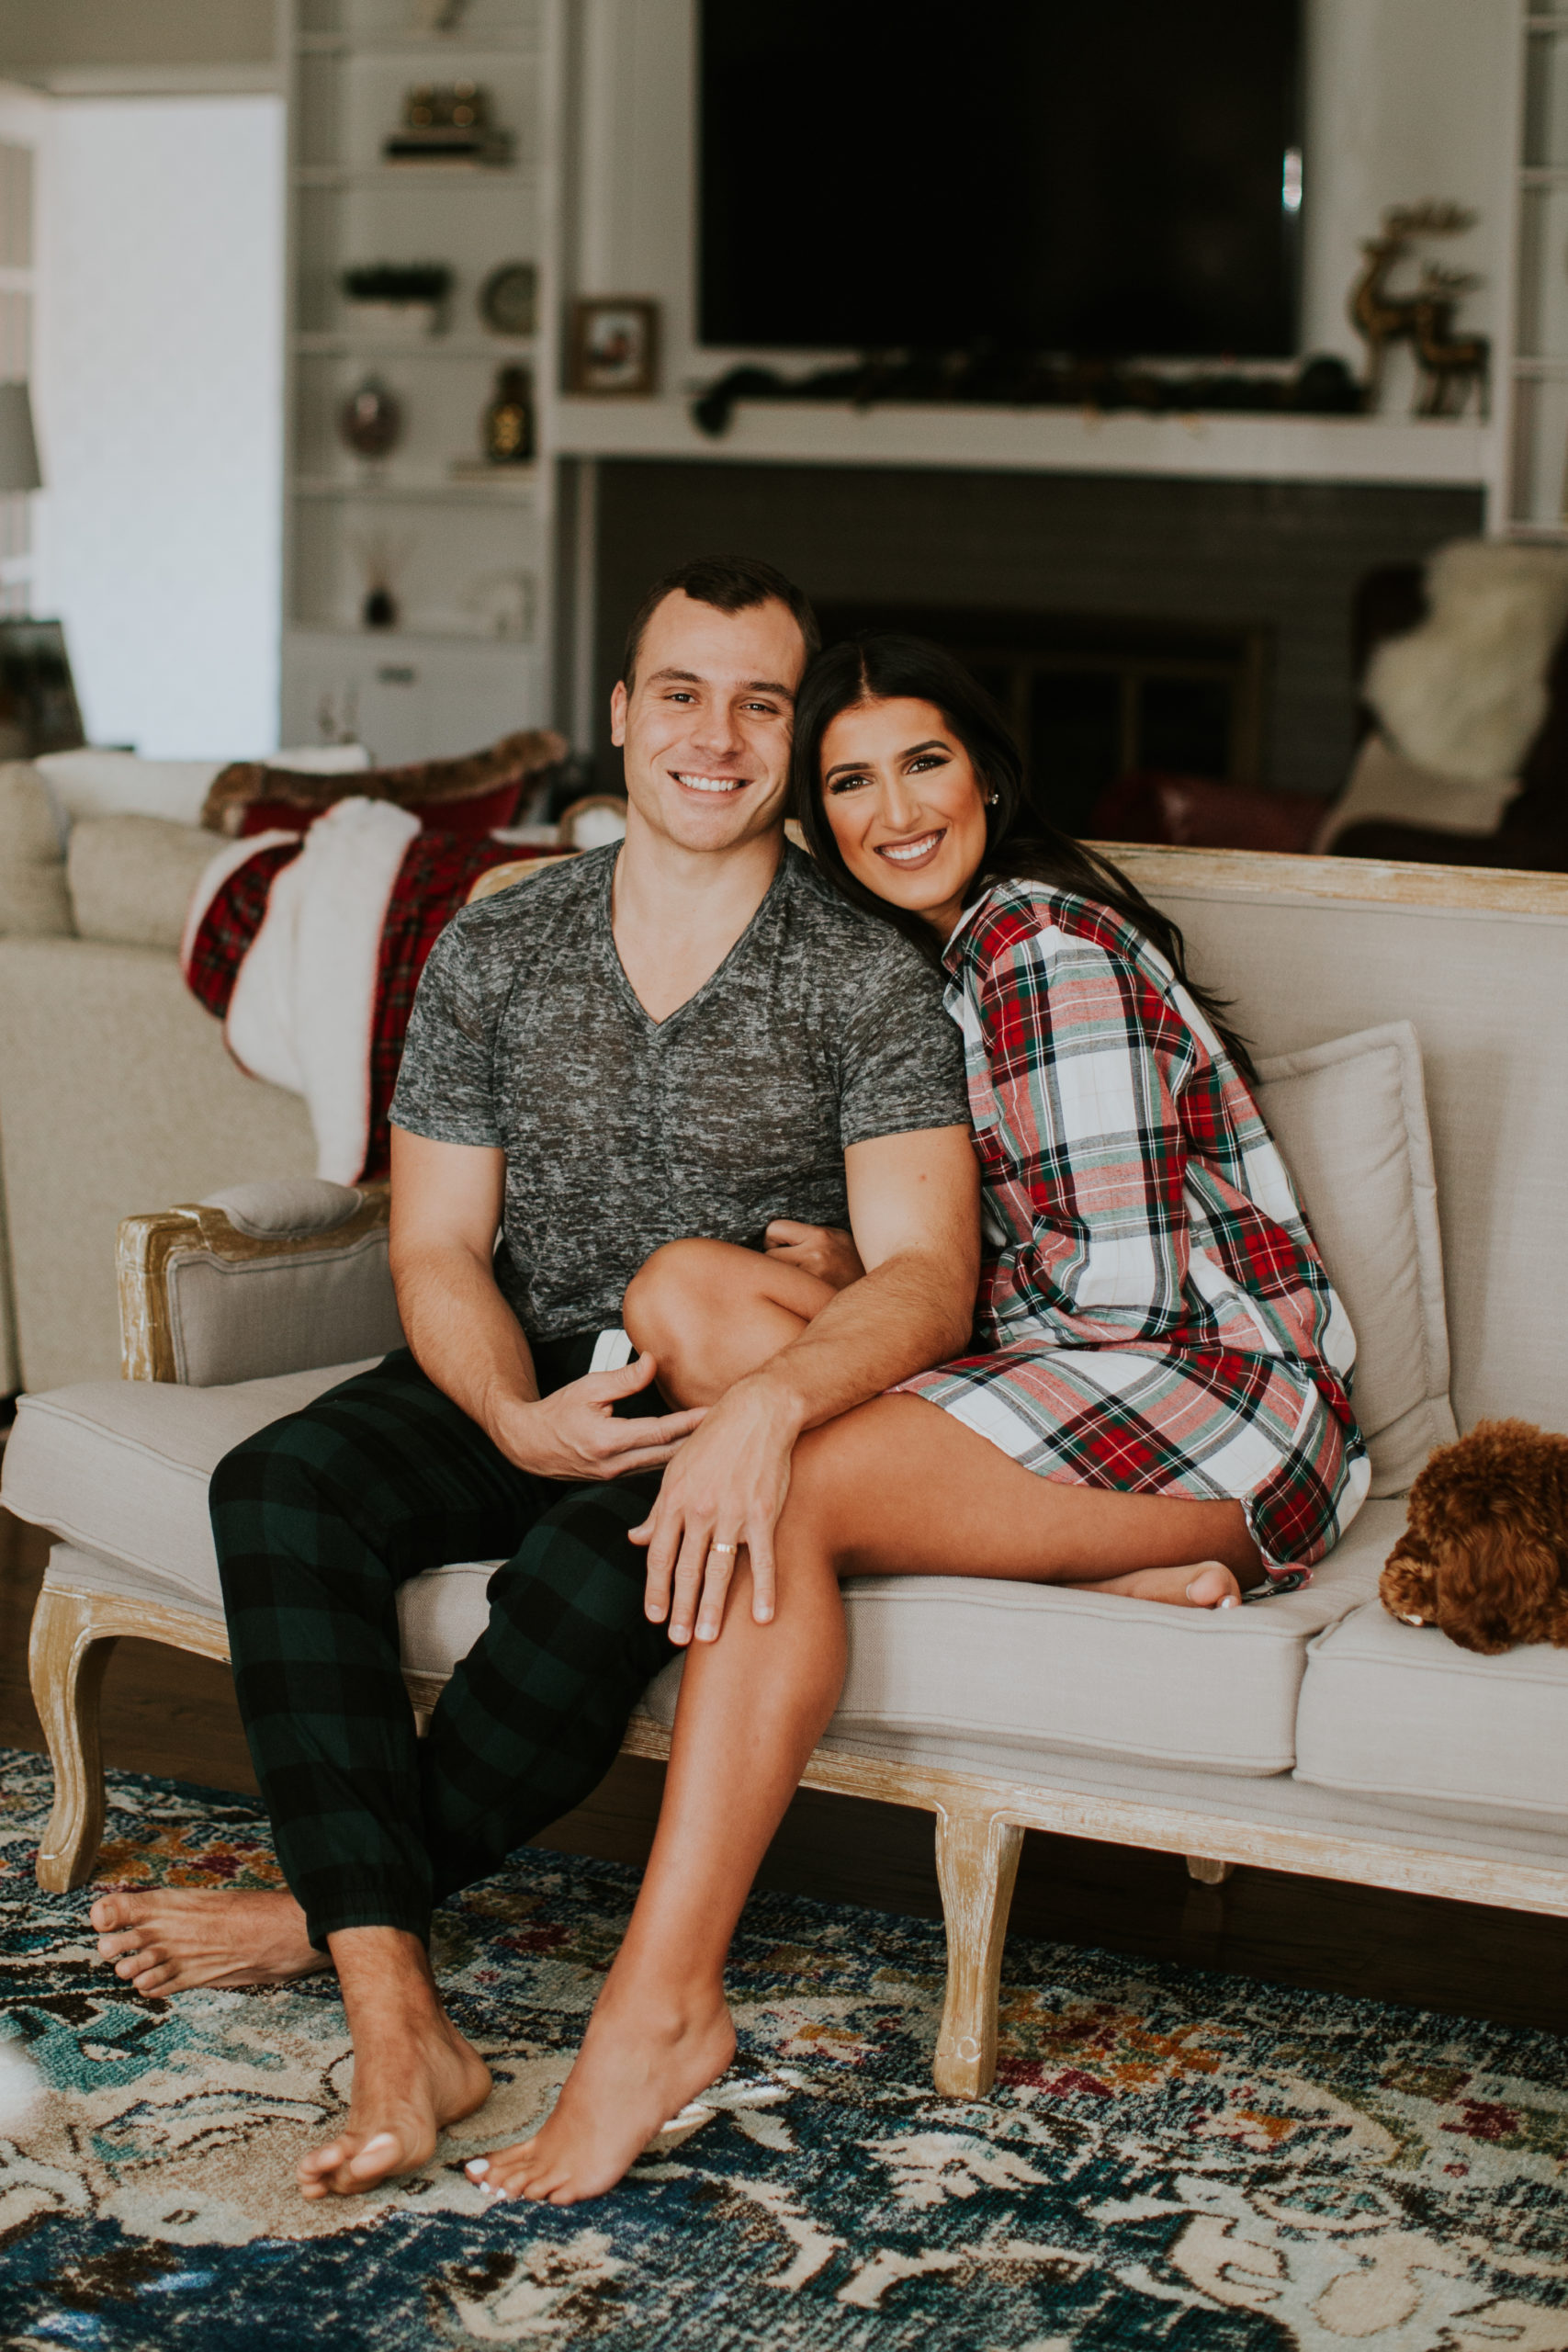 our holiday traditions, holiday pajamas, couples photos, christmas couples session, holiday couples outfit, cockapoo, a southern drawl dog, cocker spaniel poodle // grace white a southern drawl